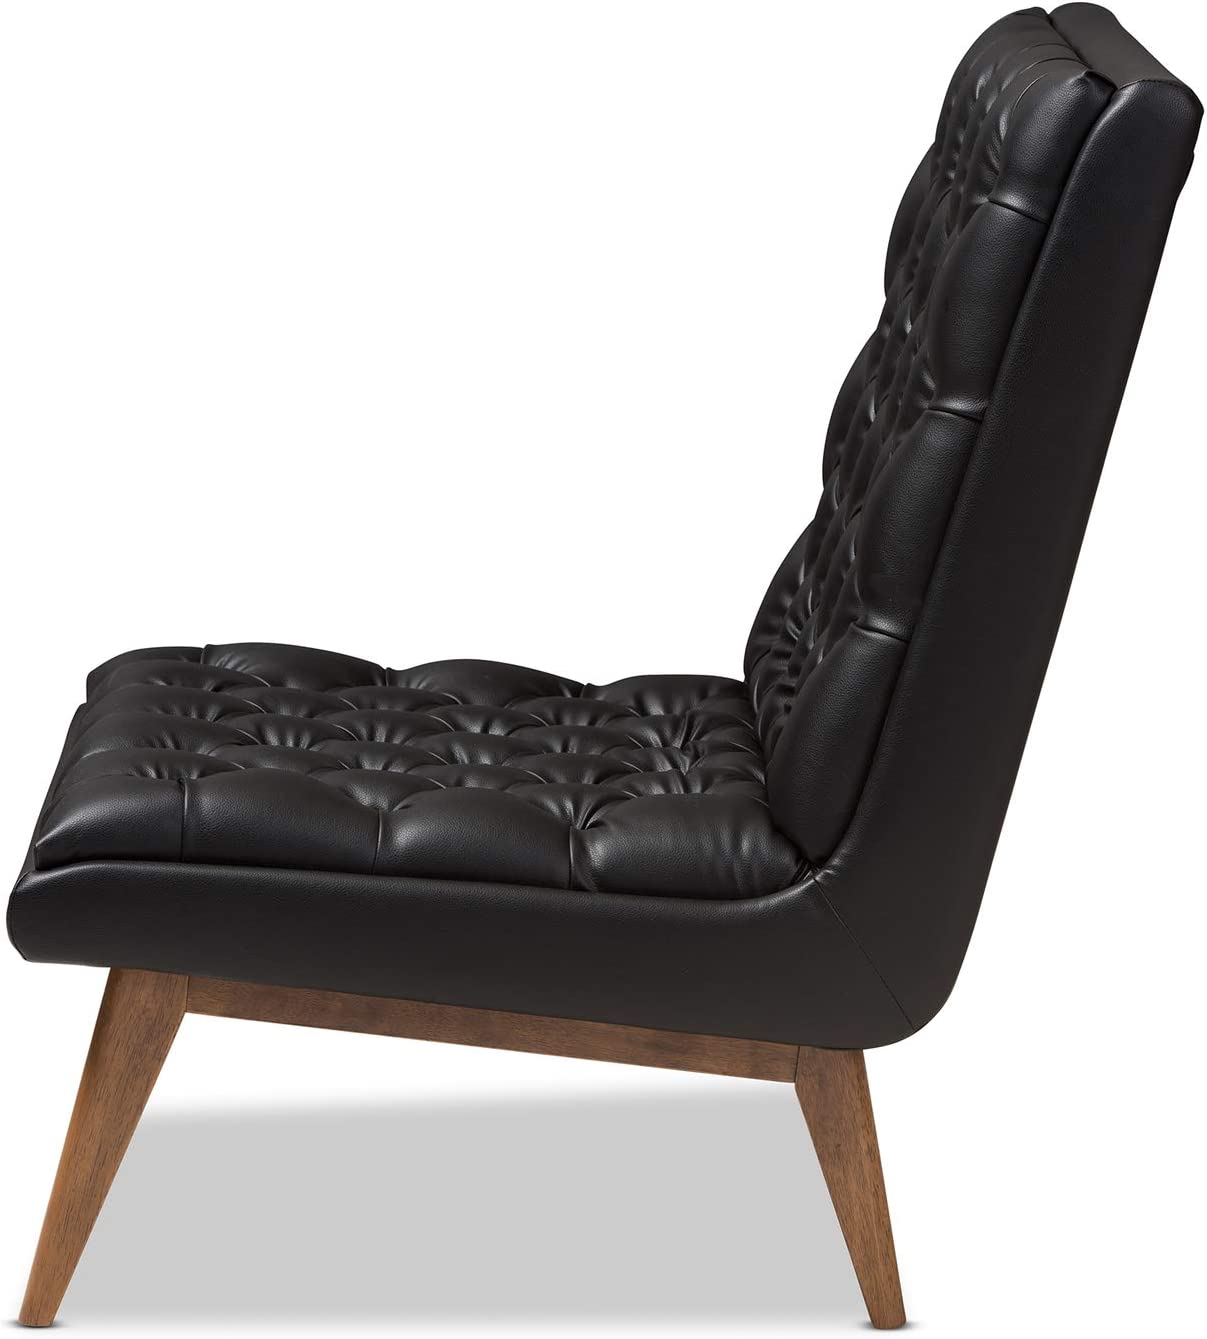 Baxton Studio Annetha Mid-Century Modern Black Faux Leather Upholstered Walnut Finished Wood Lounge Chair